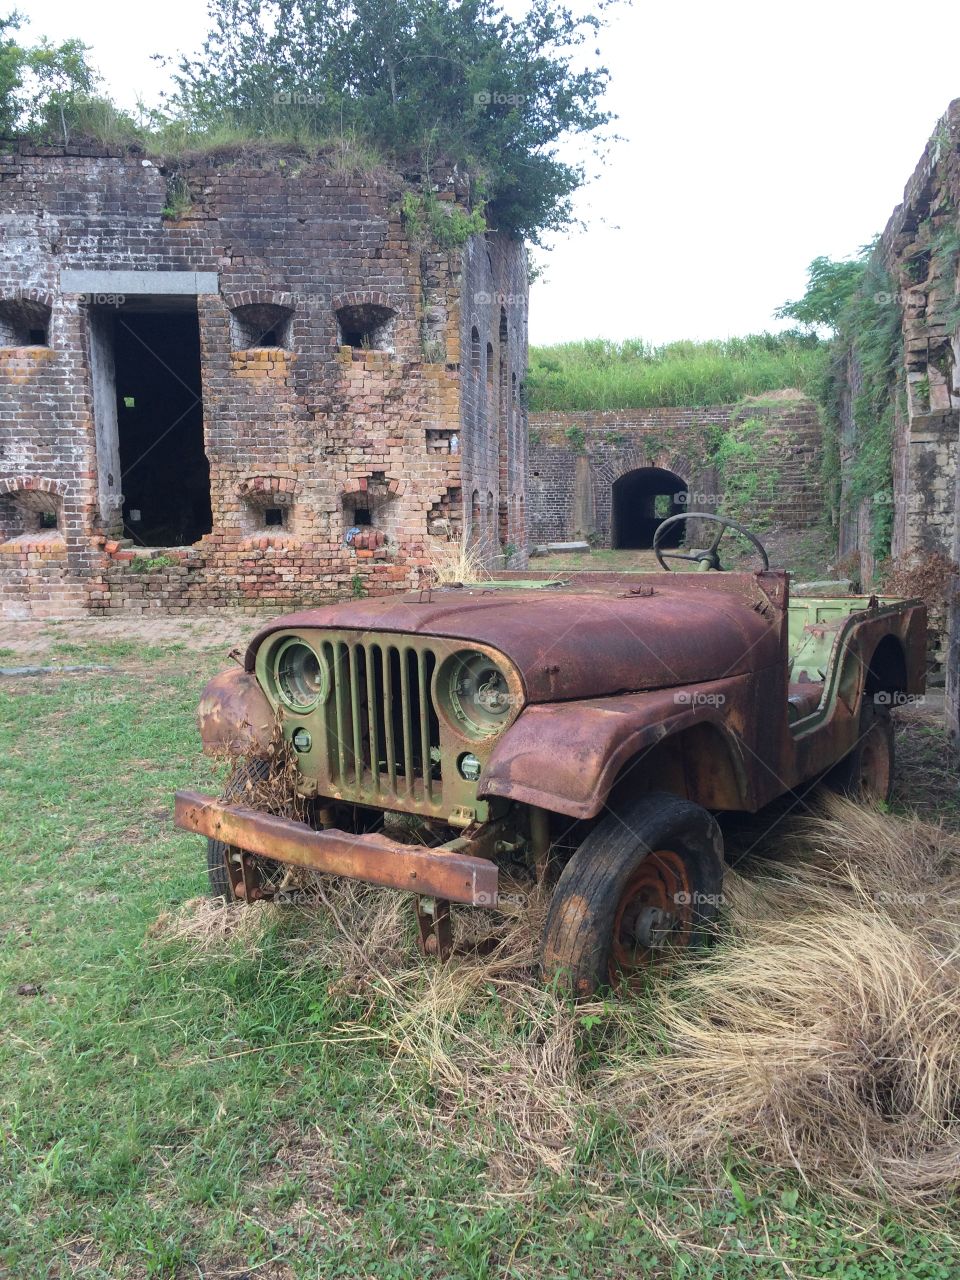 Antique rusty car in the middle of an old brick military fort in New Orleans, Louisiana. 